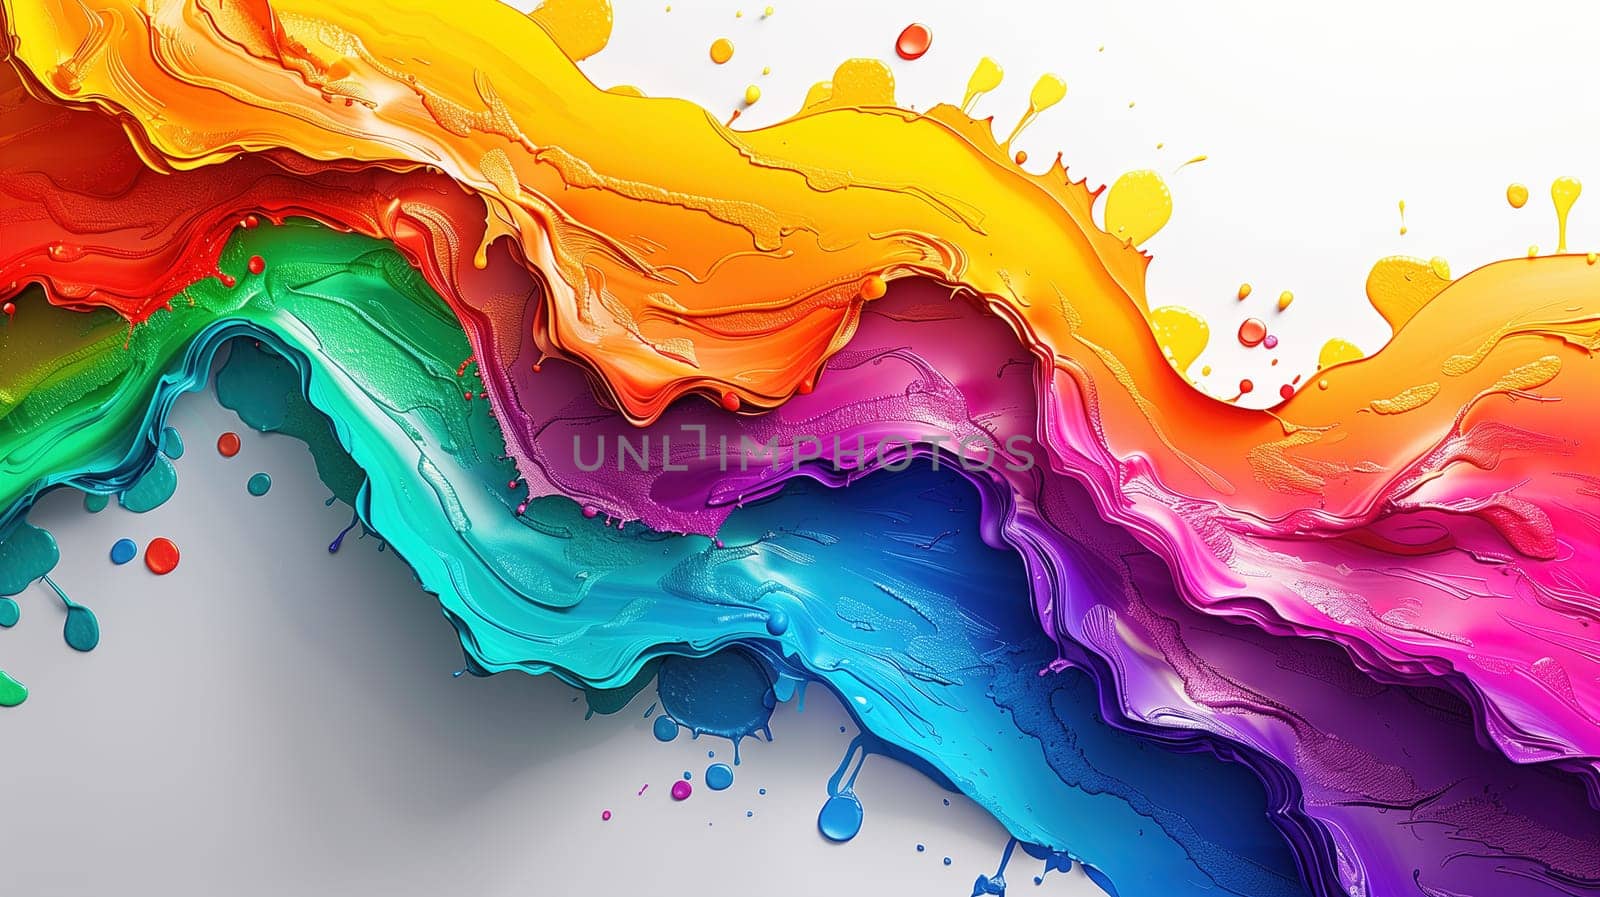 A dynamic swirl of vivid, flowing colors creates a rainbow spectrum on a flat surface, symbolizing LGBT pride and diversity. The flowing acrylic paints blend into one another, reflecting the unity and inclusivity of the pride movement.